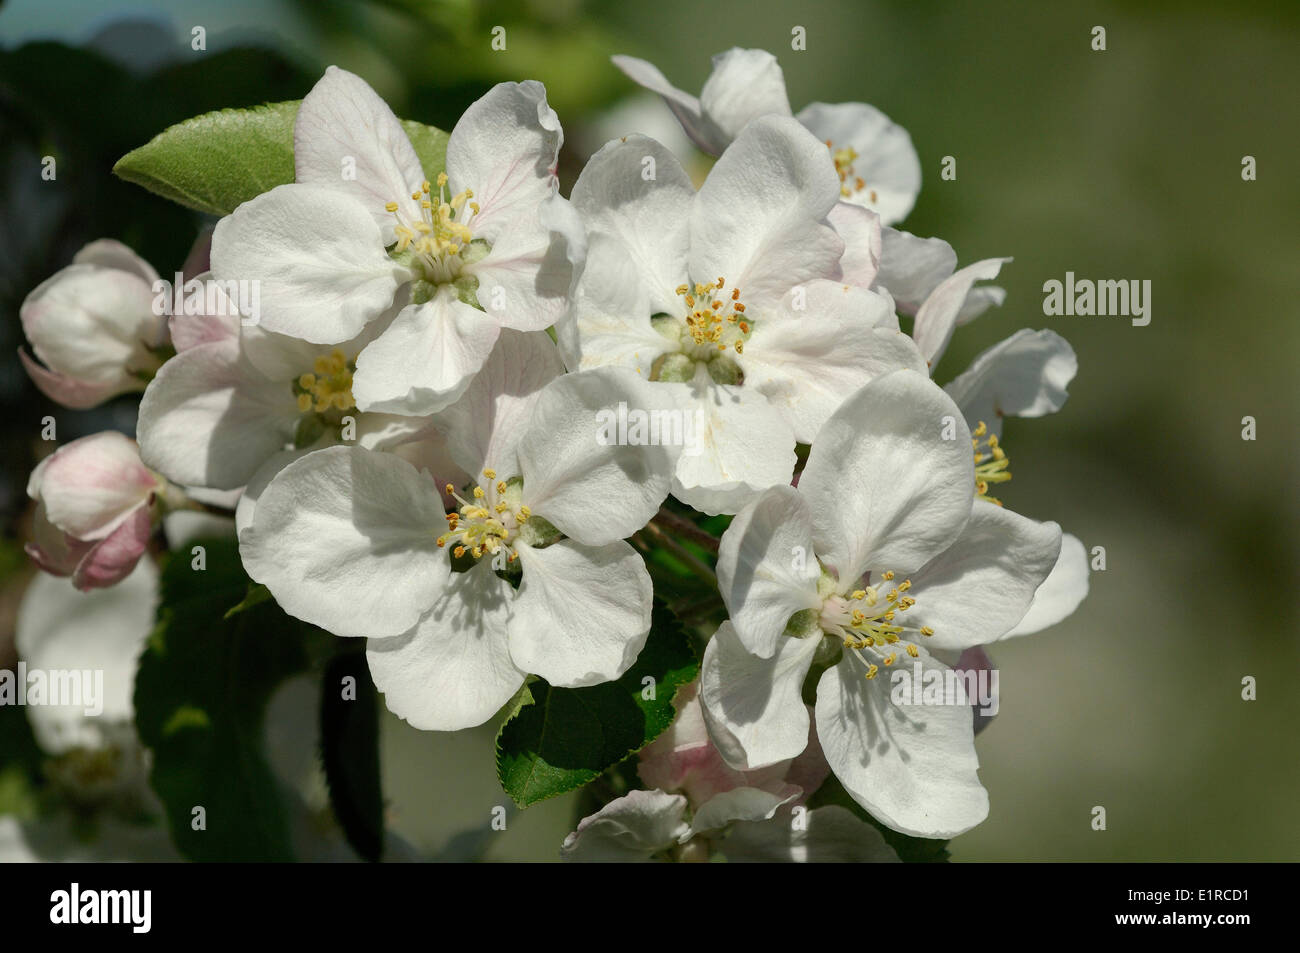 Pear blossom in close-up Stock Photo